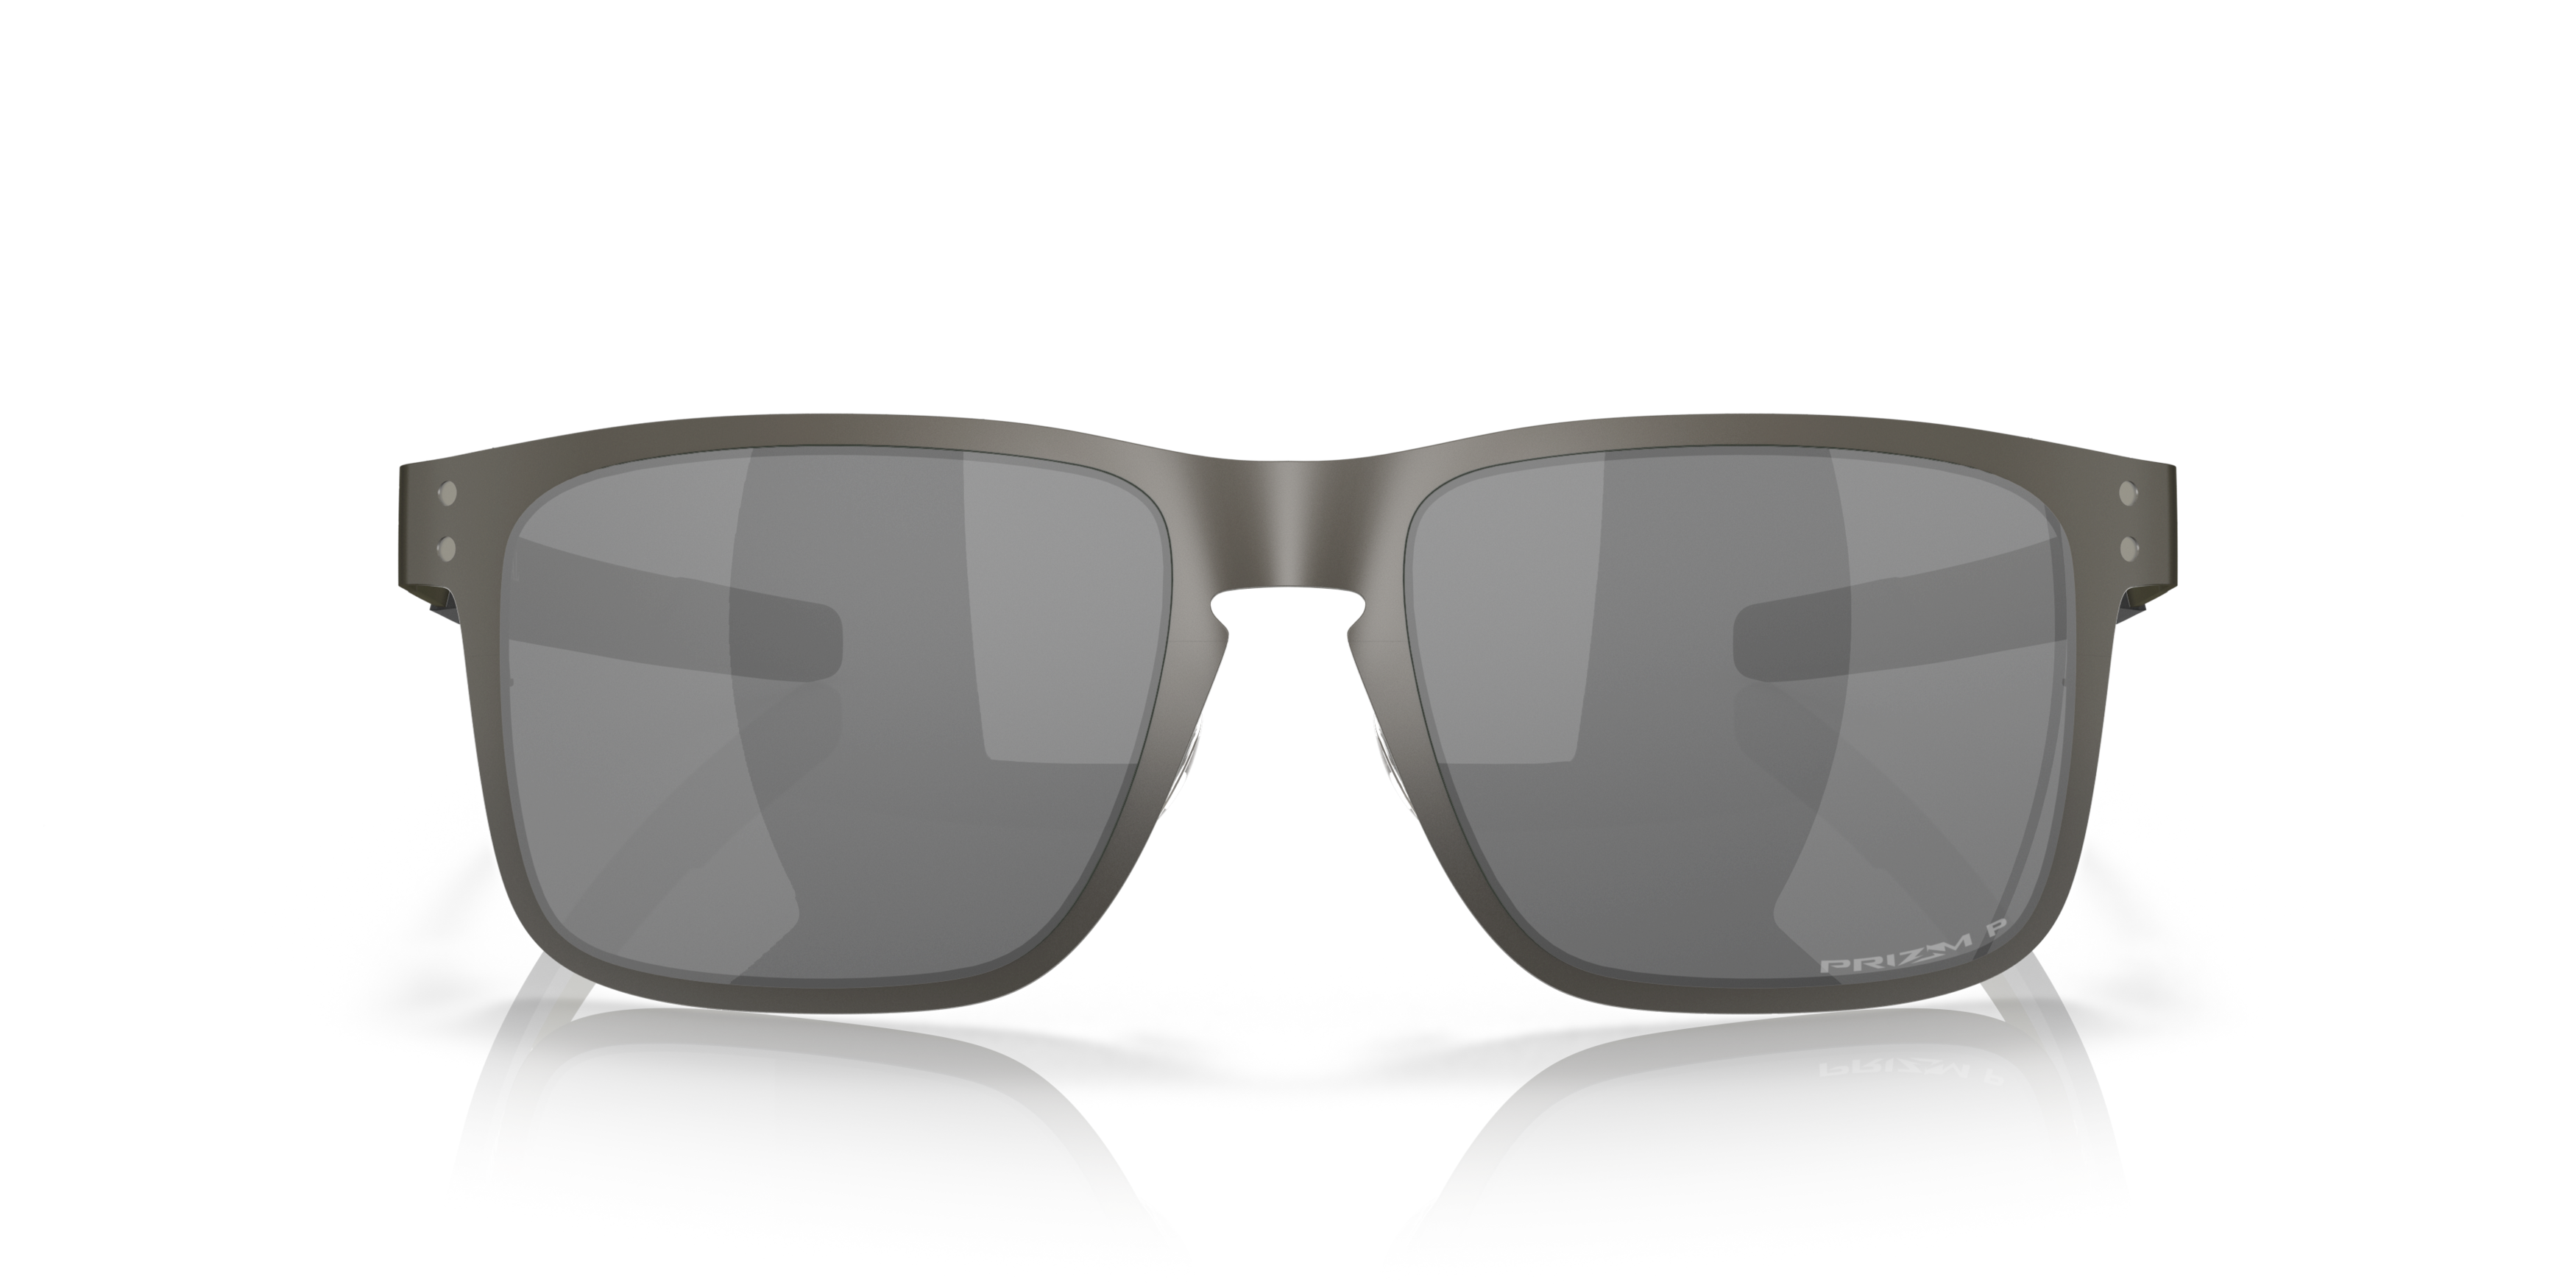 [products.image.front] Oakley Holbrook Metal OO4123 0655